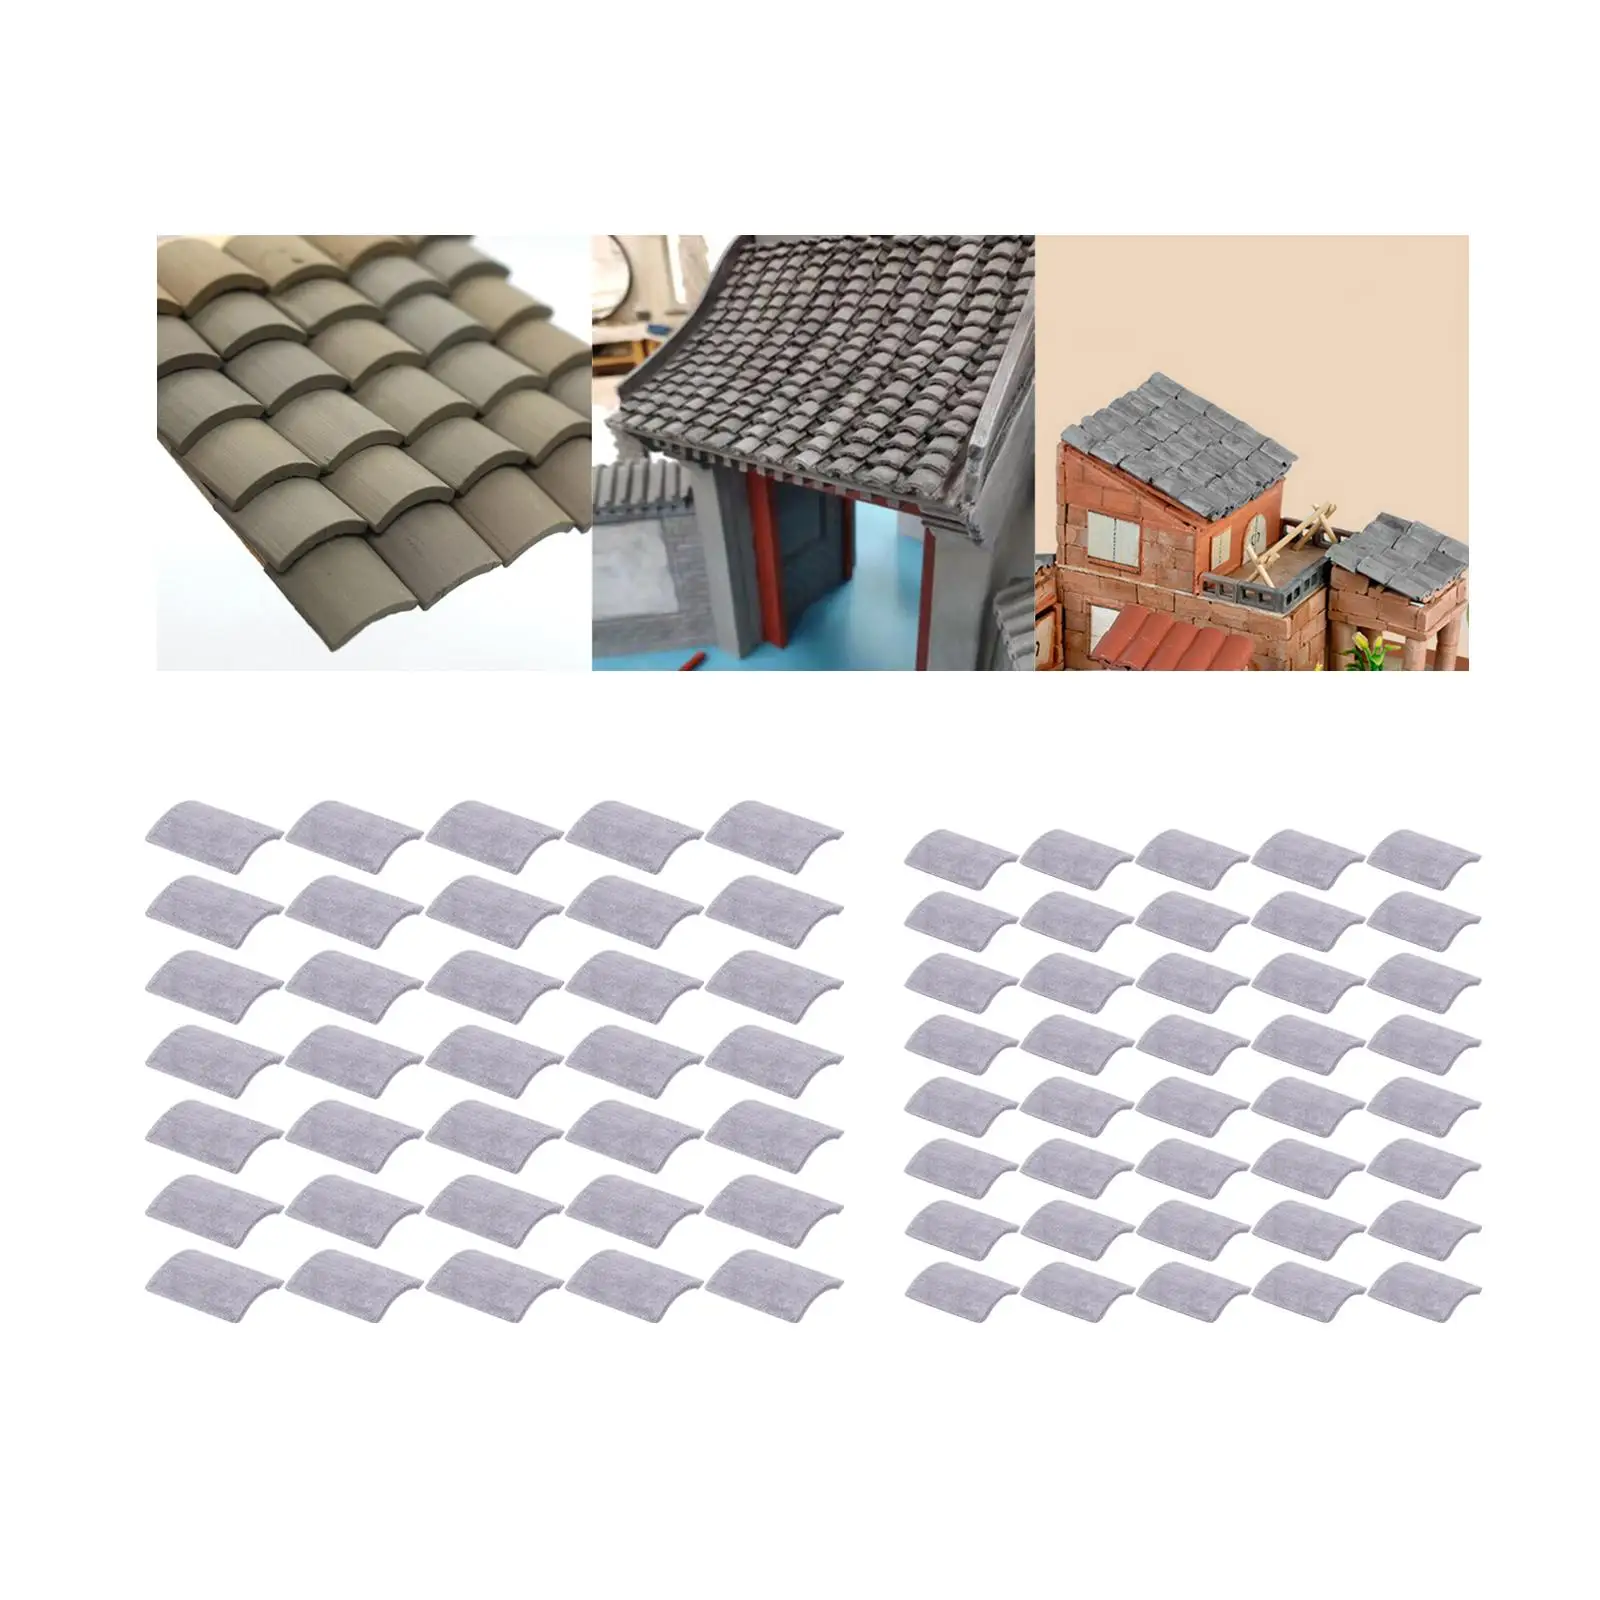 Grey Roof Tiles Model Building Set Dollhouse Scenery Miniature 1/16 Grey Wall Bricks for Dollhouses Living Room DIY Accessories